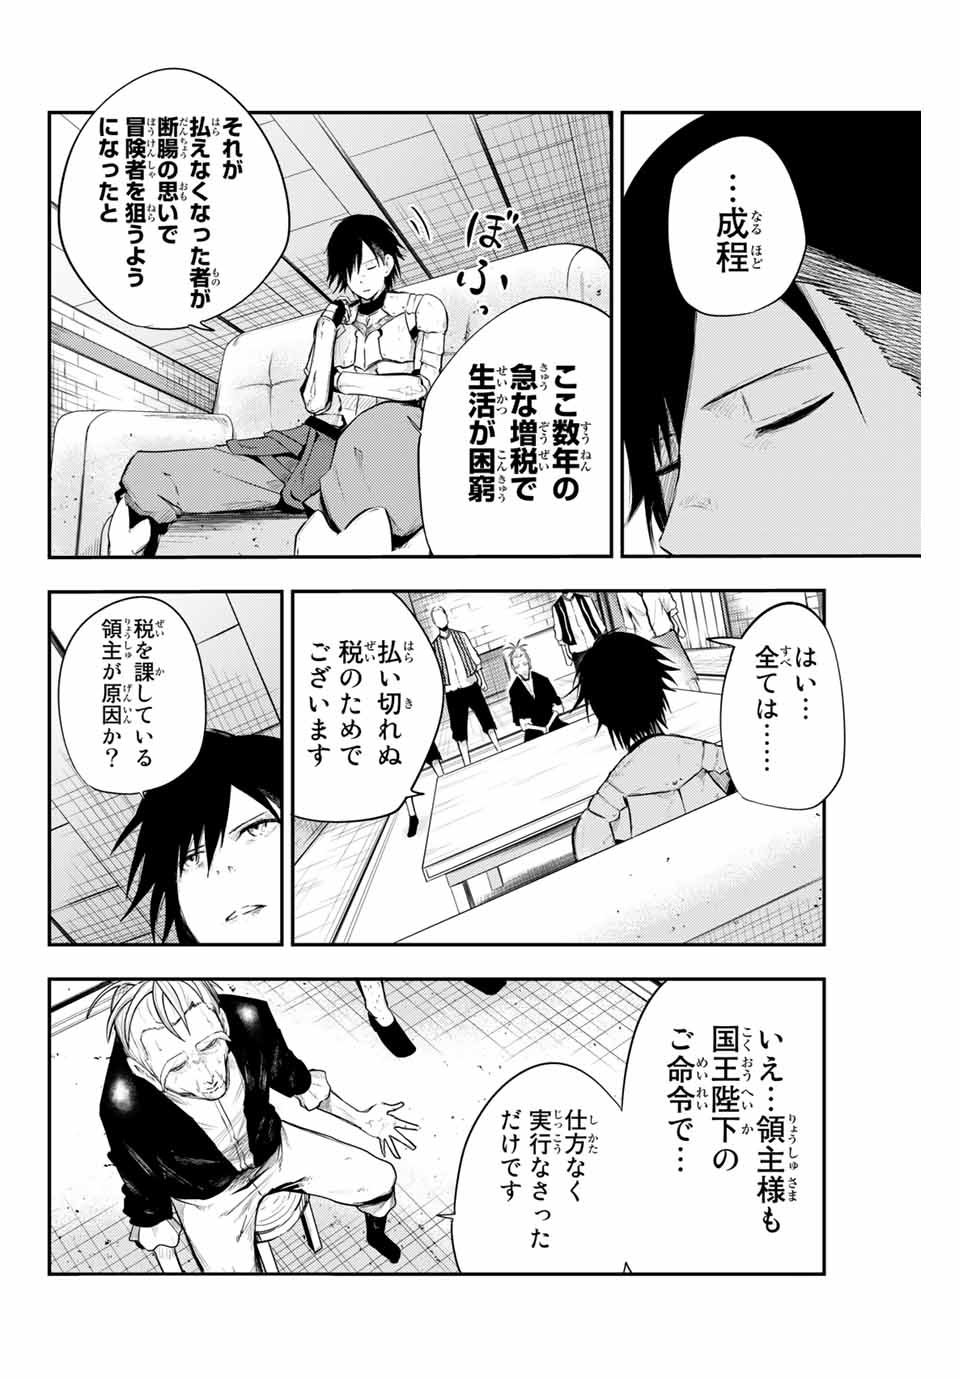 the strongest former prince-; 奴隷転生 ～その奴隷、最強の元王子につき～ 第6話 - Page 2